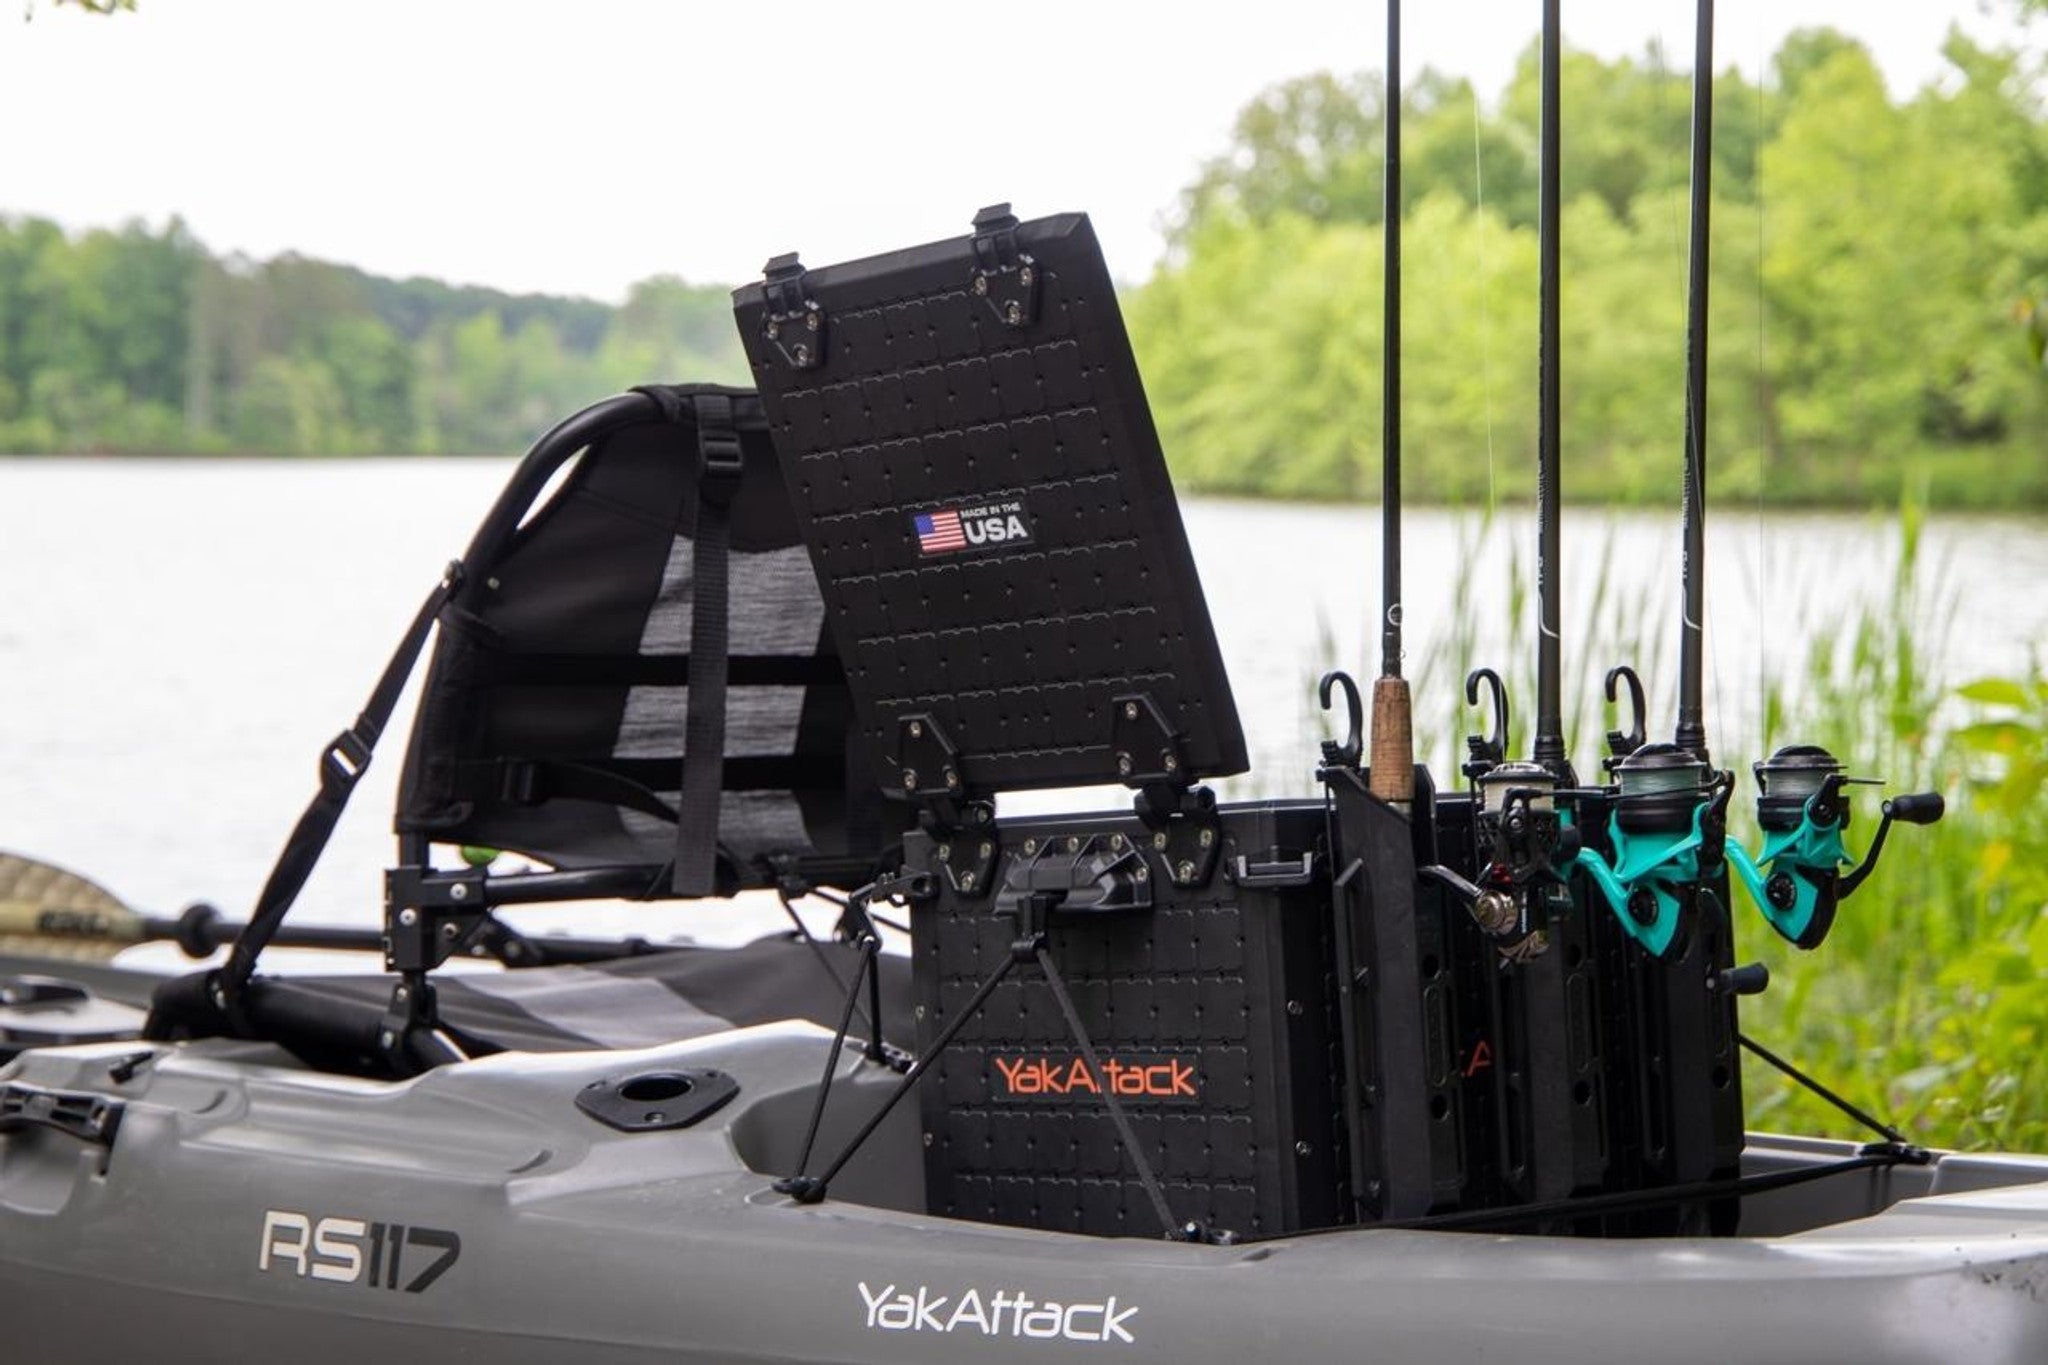 Plano Kayak V-Crate  Gear Preview 